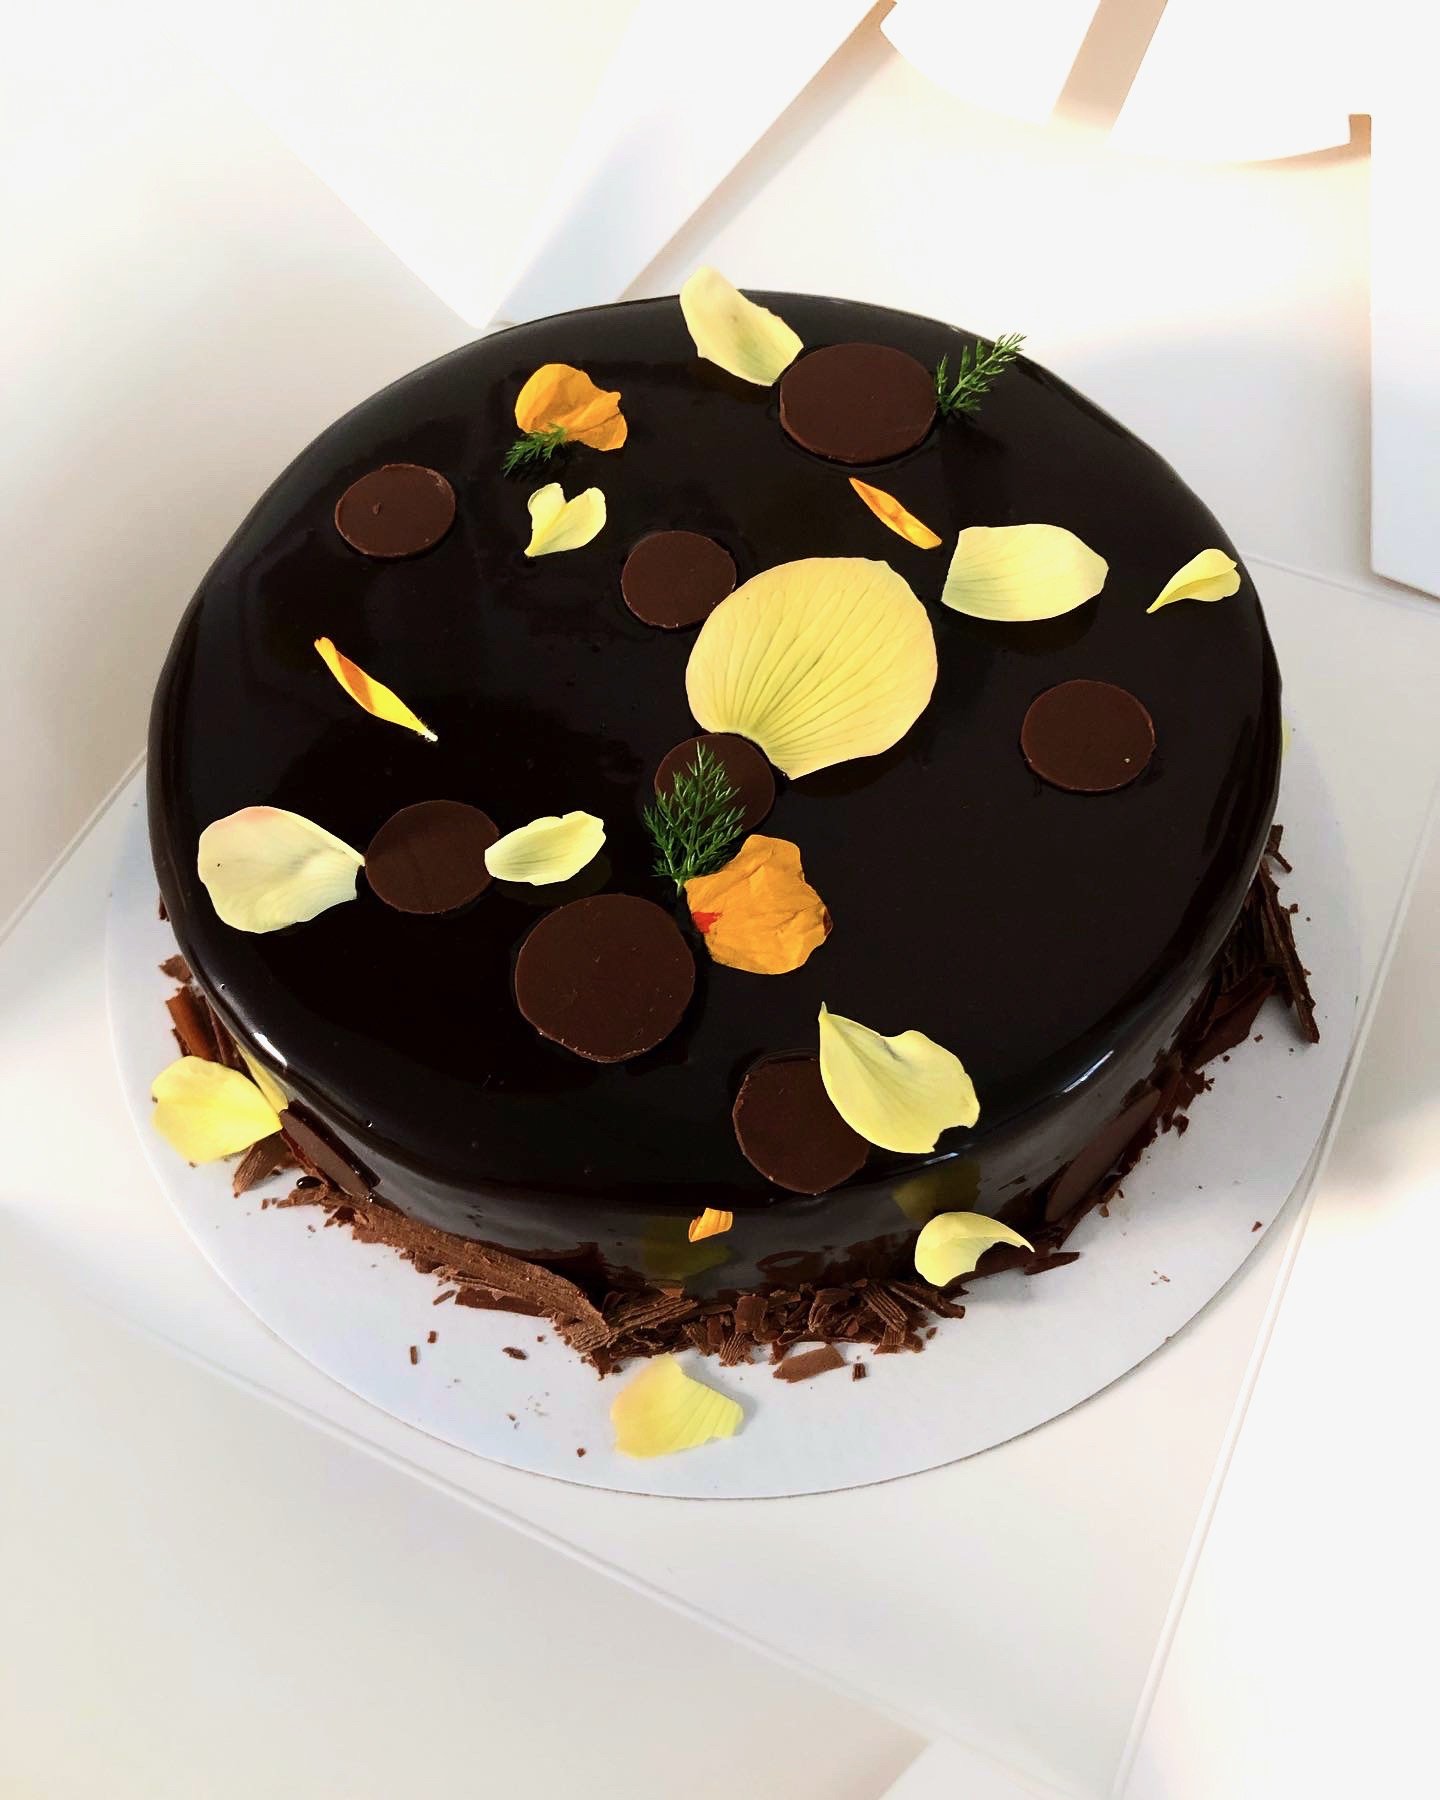 CHOCOLATE MOUSSE CAKE  - with floral decorations